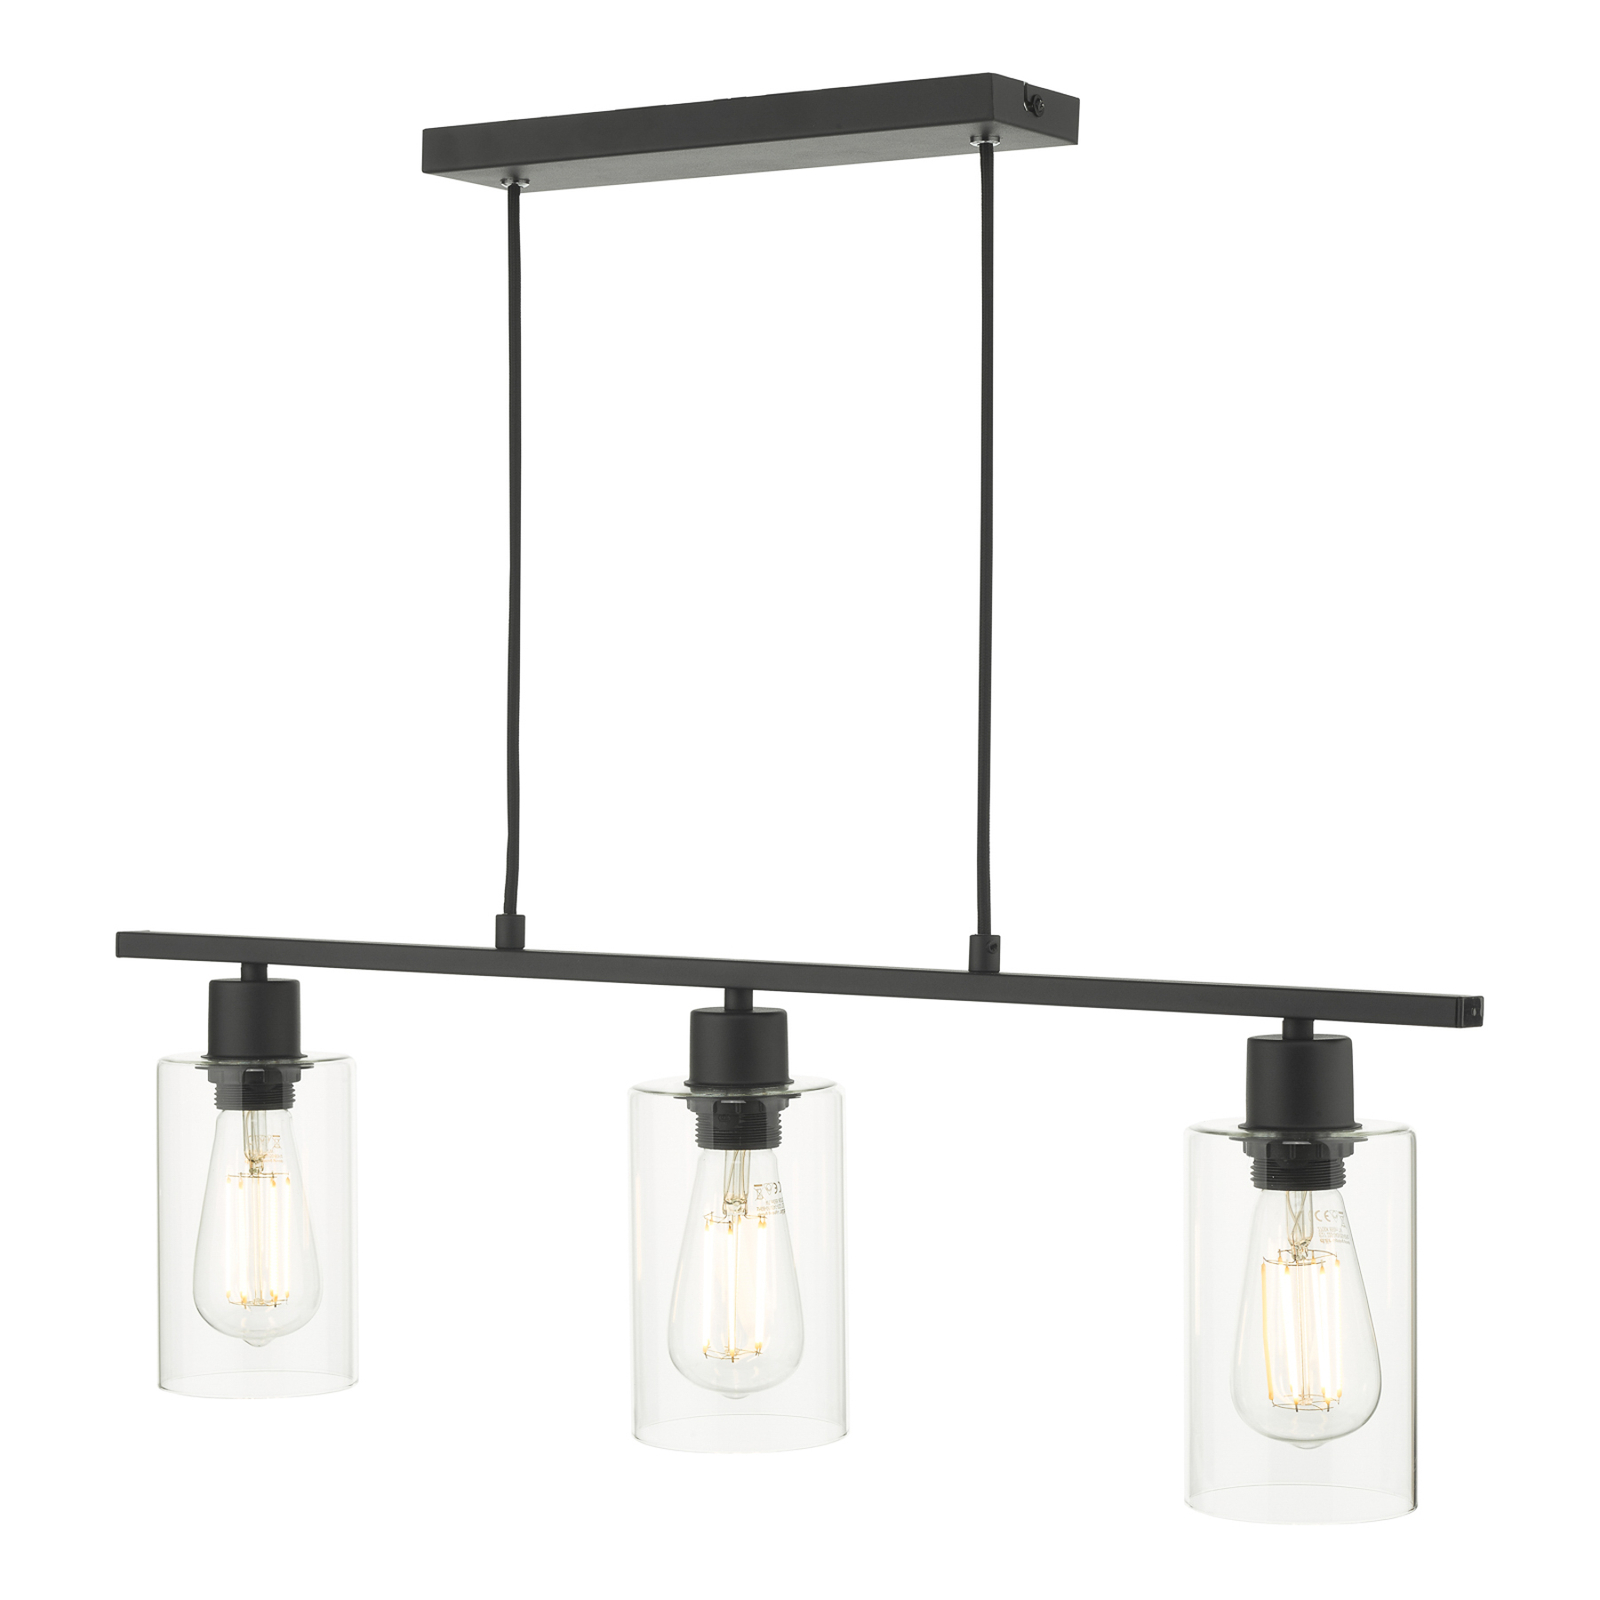 Miu pendant light in black with 3 clear lampshades